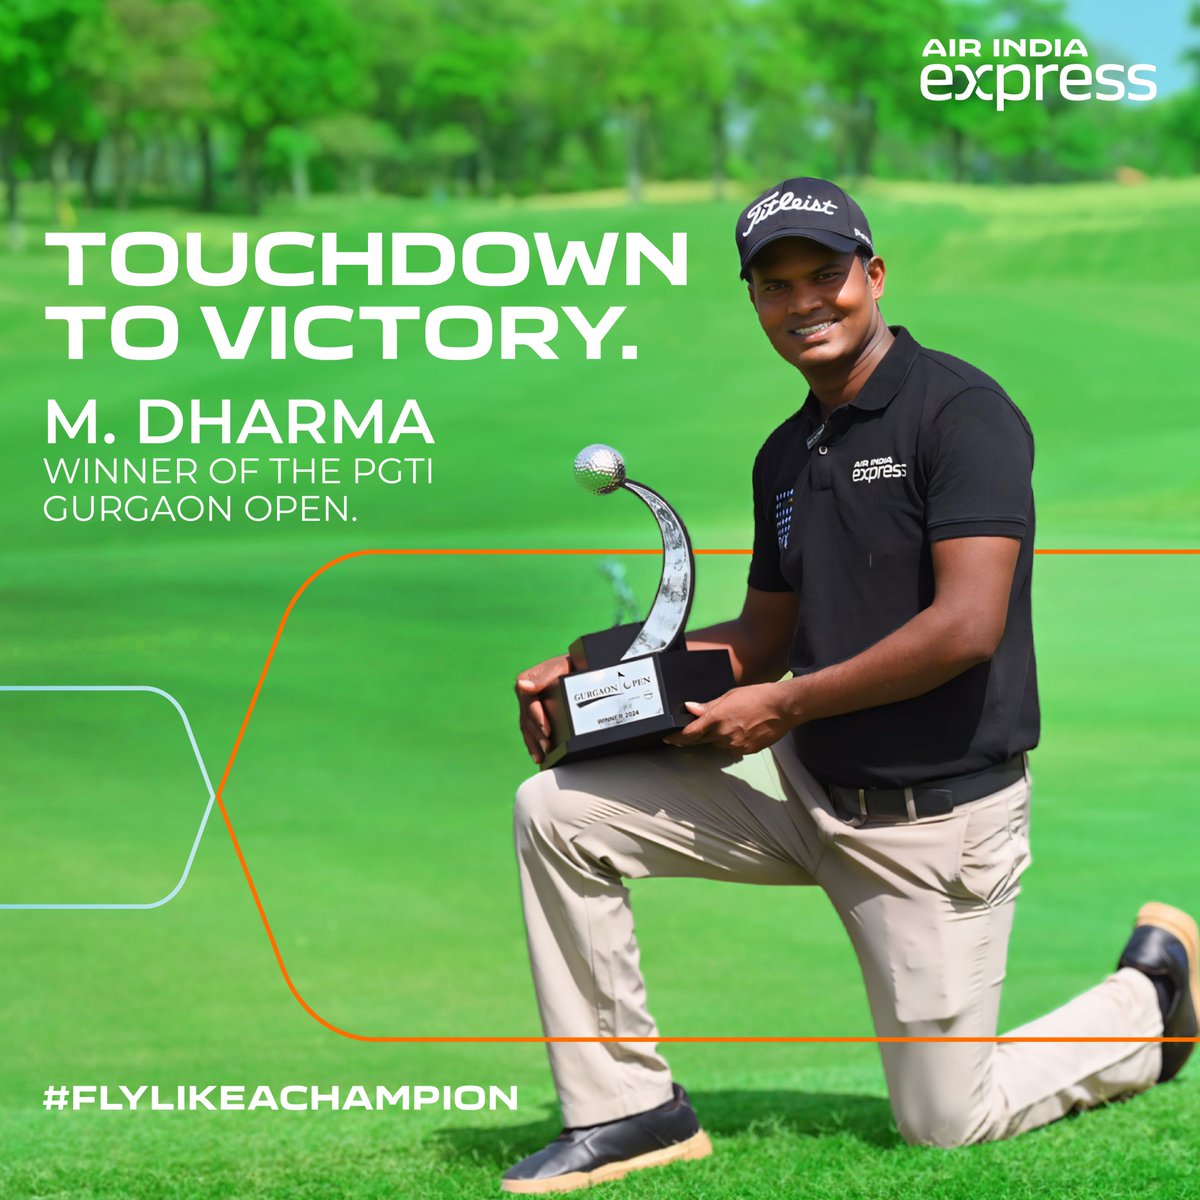 🎉 A round of applause for M Dharma, the champion of the @pgtofindia Gurgaon Open 2024! 🏌️‍♂️ With every tournament, your skill and determination redefine Xcellence! We're thrilled to be a part of your journey, ensuring you arrive at each tournament to #FlyLikeAChampion. Here's to